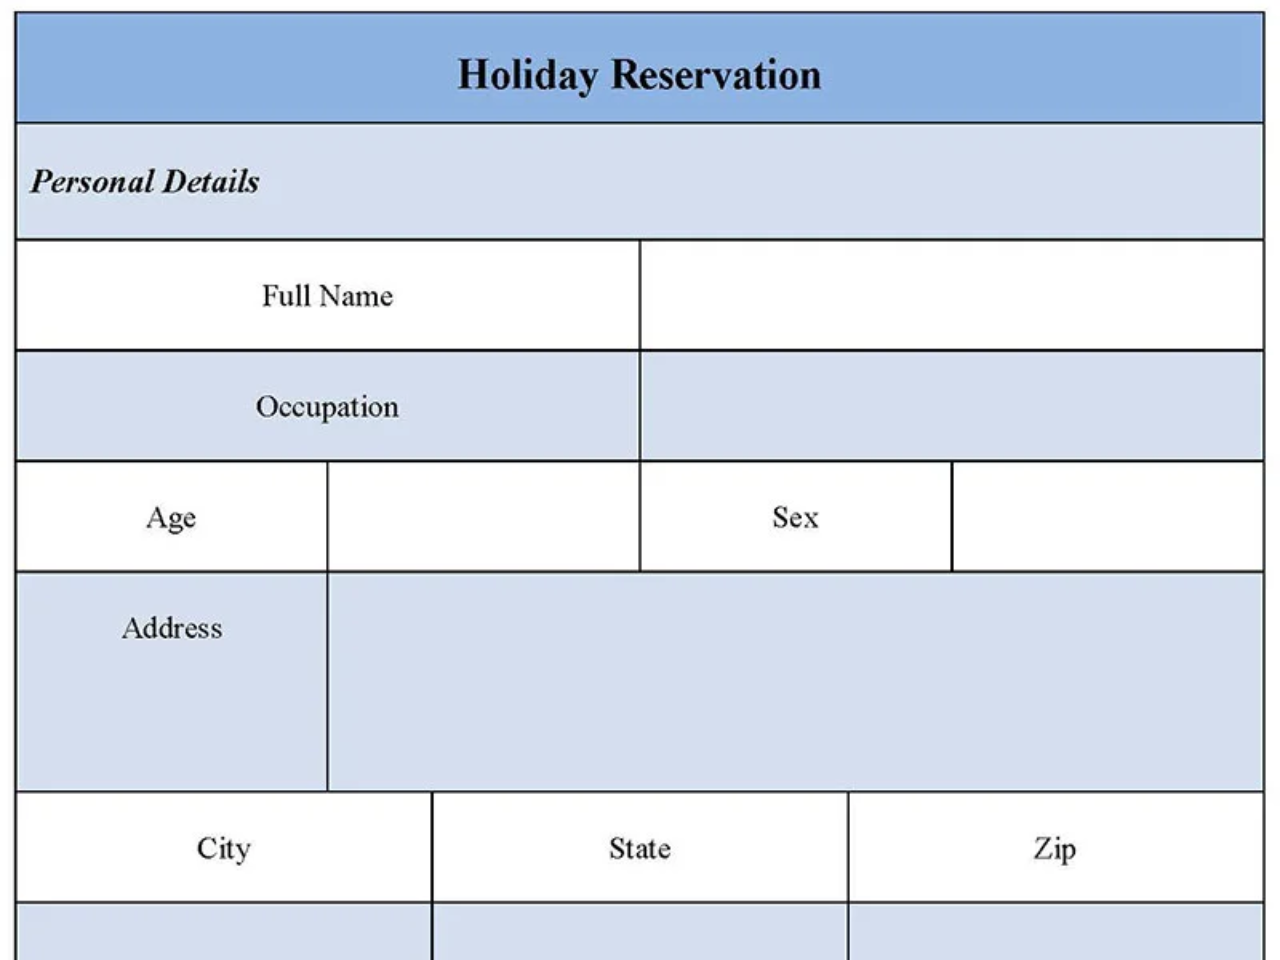 Holiday Reservation Form